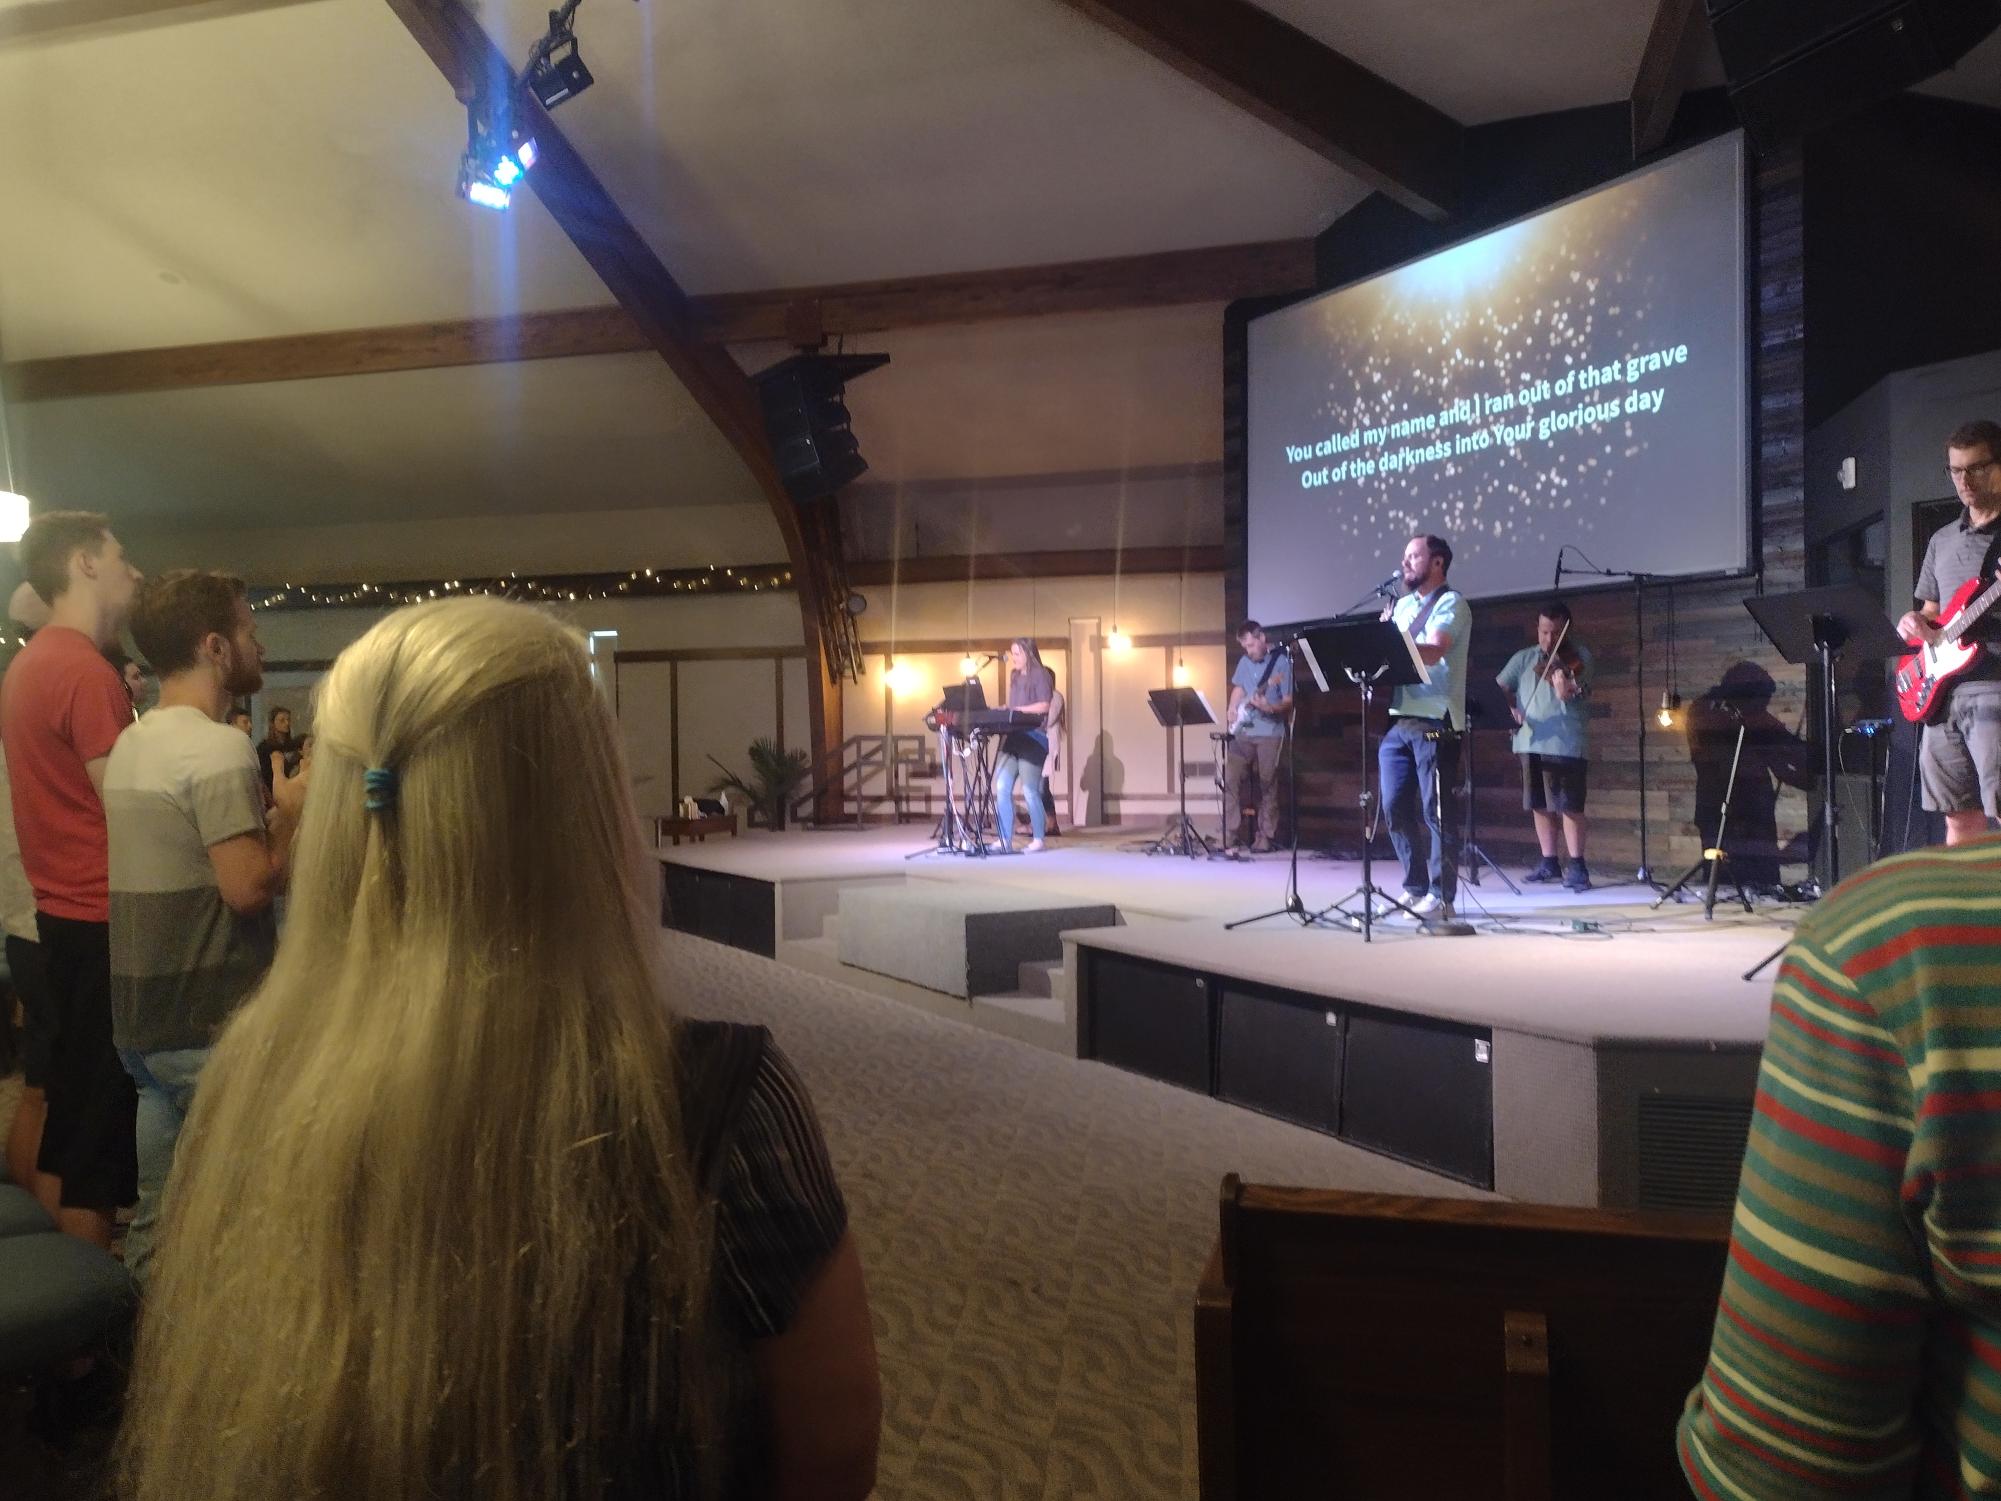 Pictured above is a worship group performing on stage at Lakewood Vineyard Church. Worship groups are religious teams that perform Christian music, starting and ending Christian services. The words are typically projected on screen so attendees can sing along.